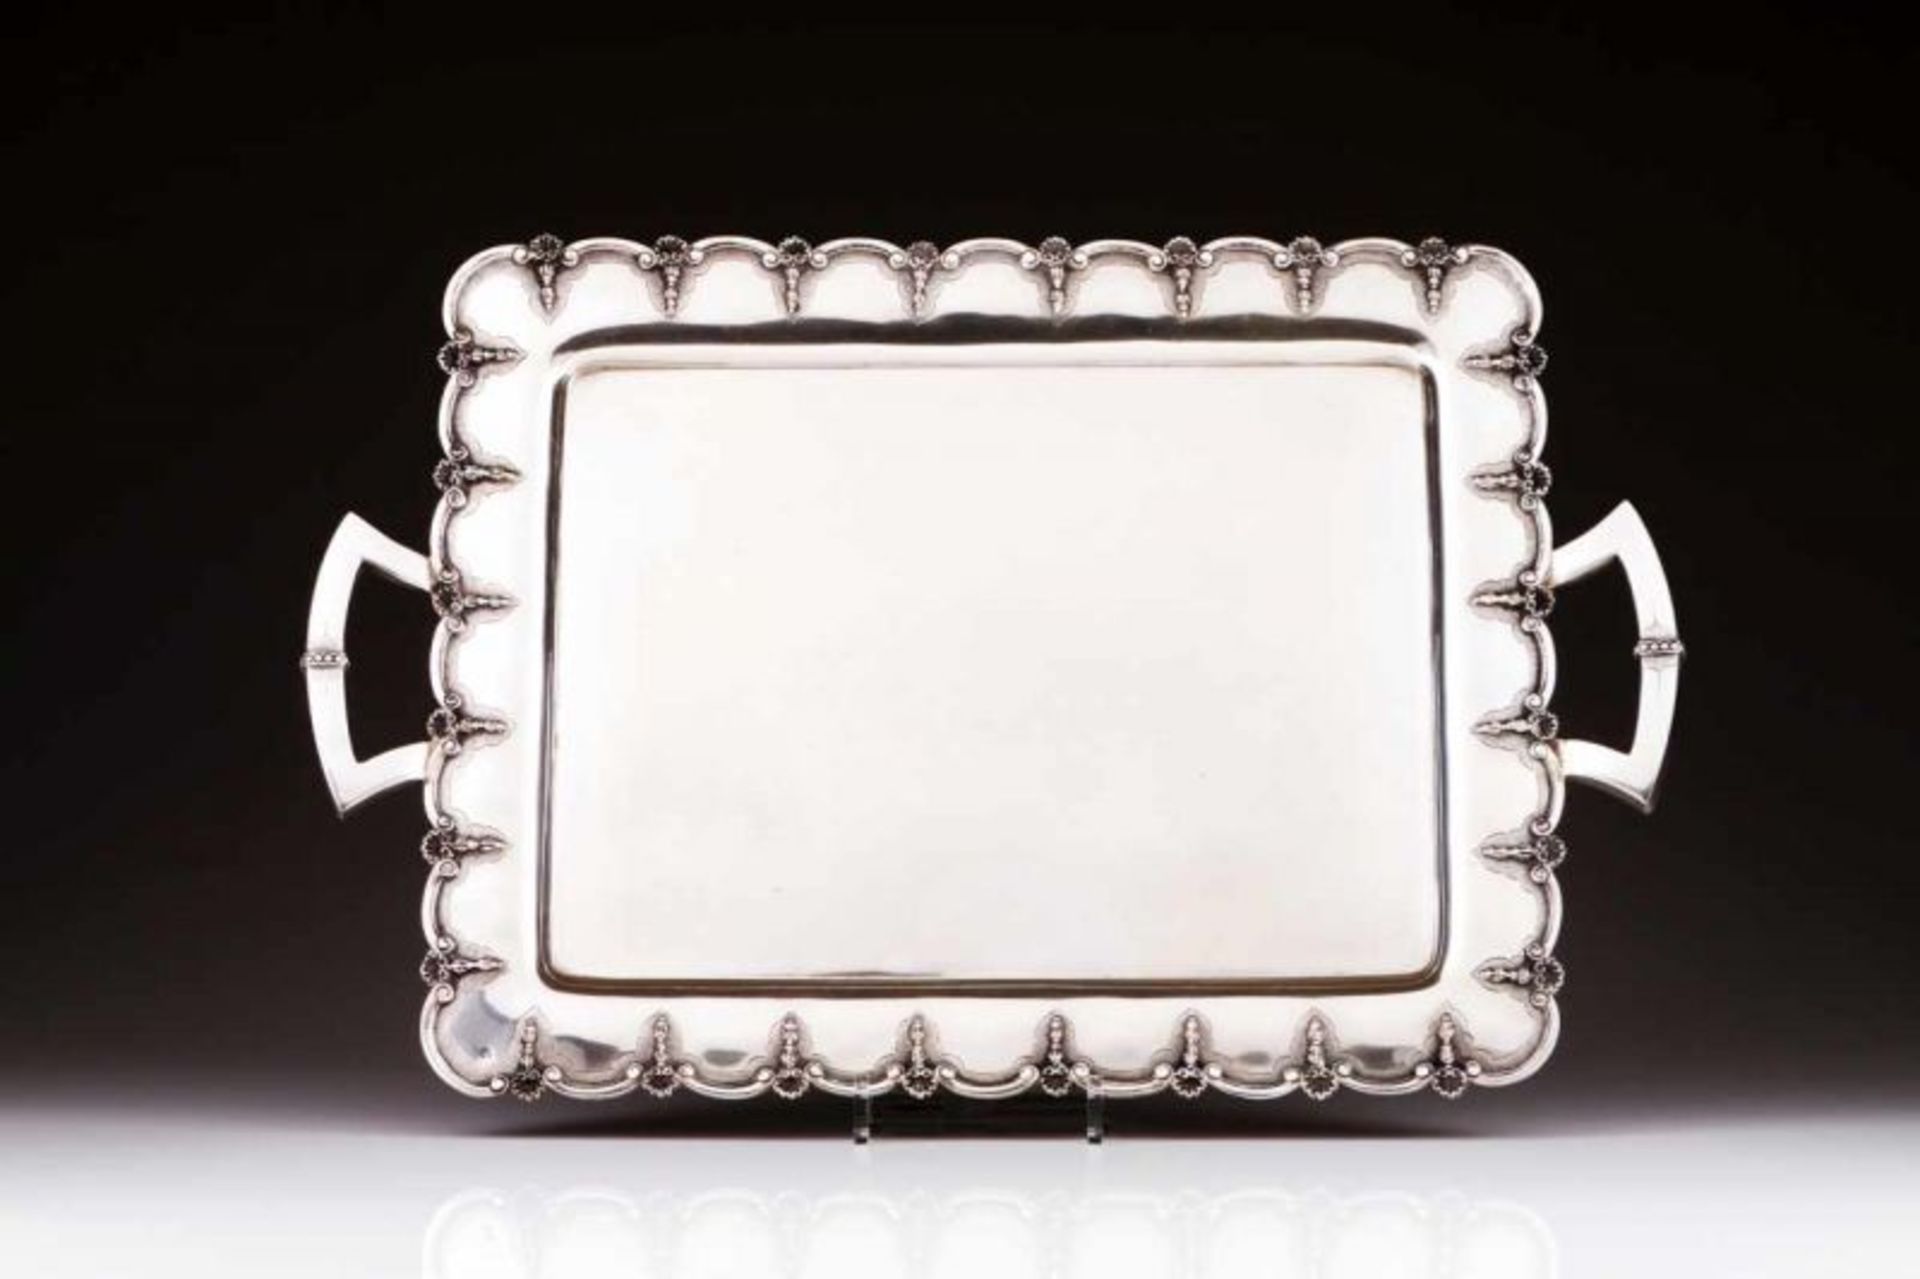 A tray Portuguese silver Scalloped tab decorated with volutes, shells and geometric handles Assay